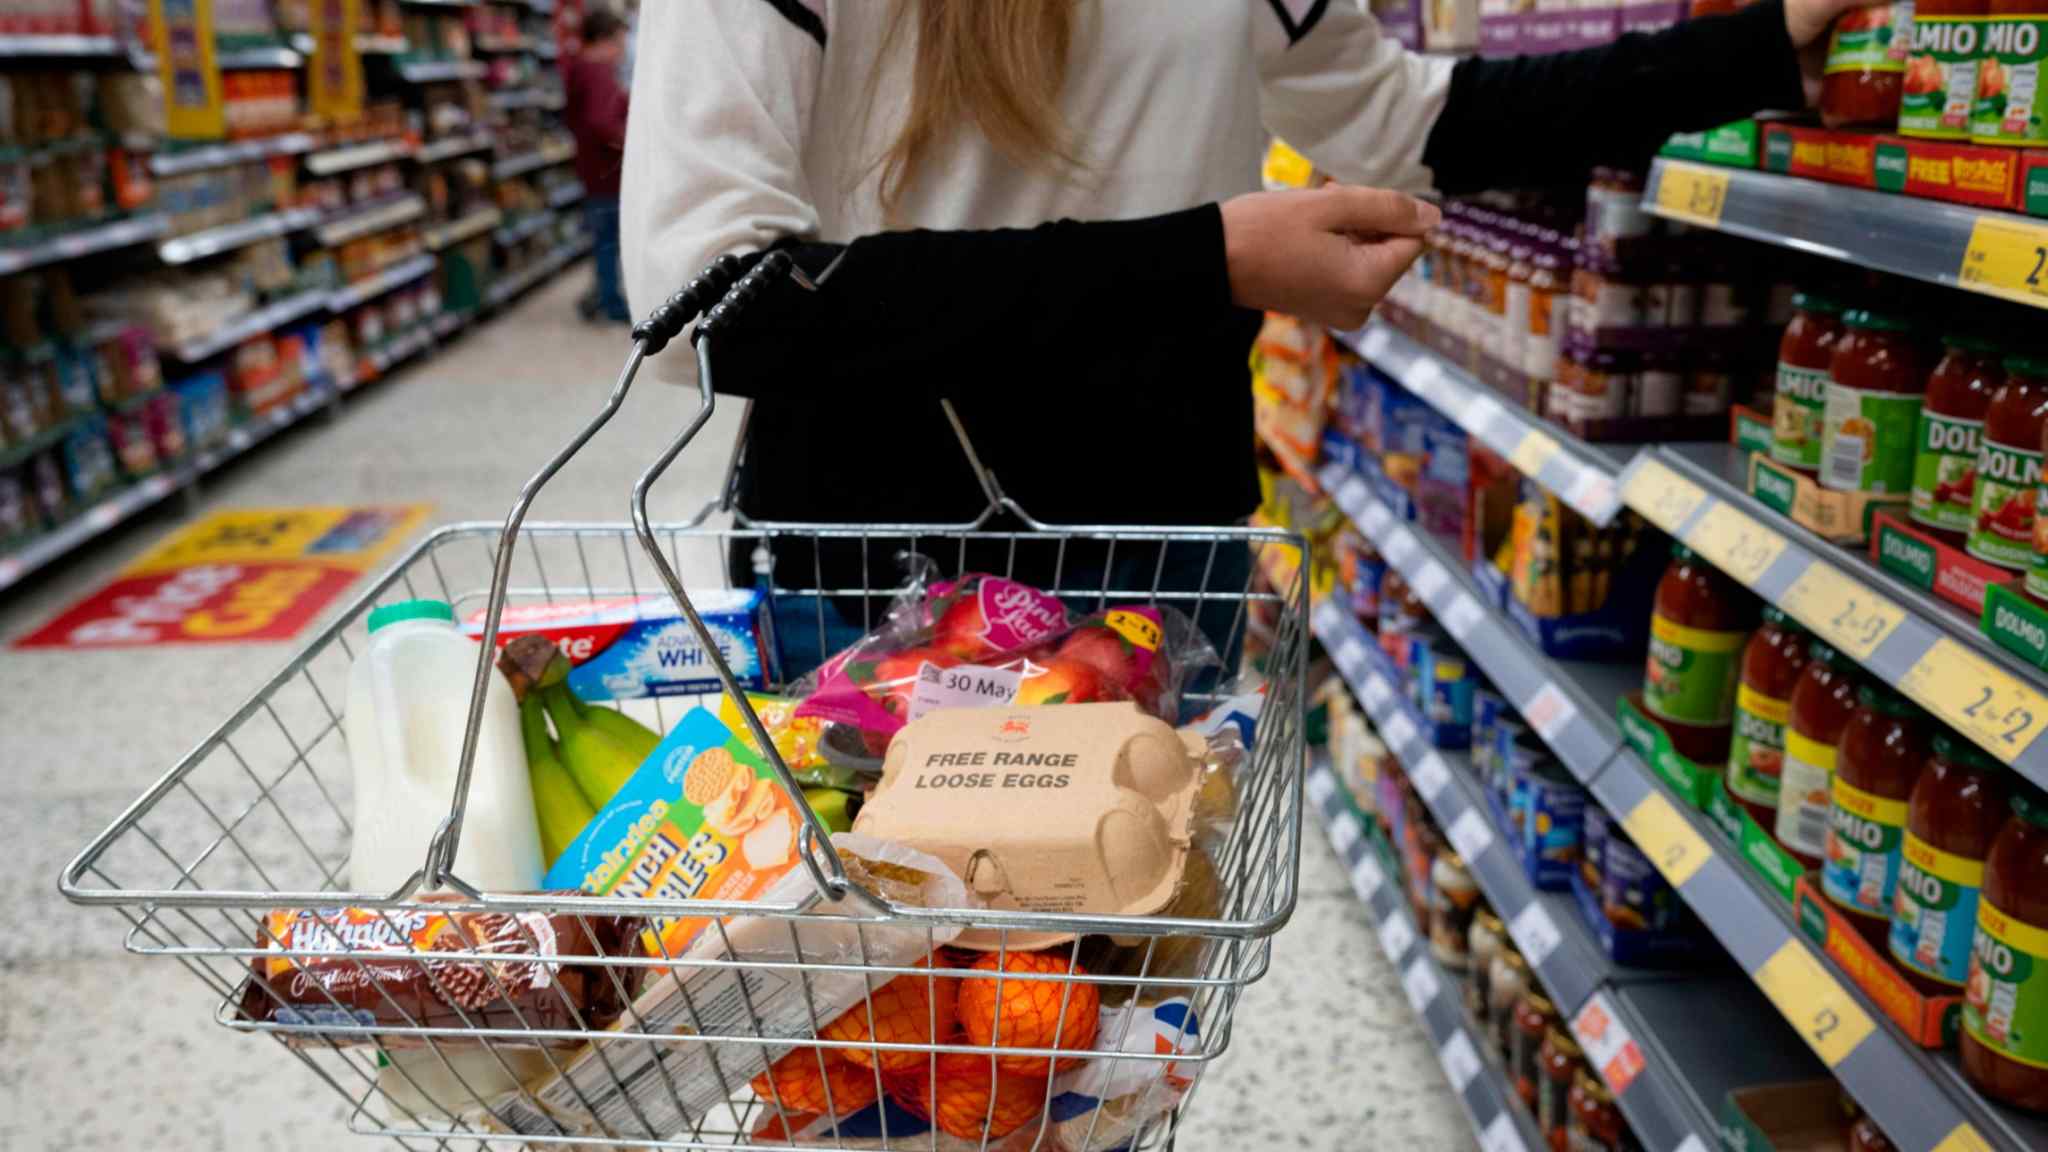 Live news: UK grocery price inflation eases for first time in 21 months